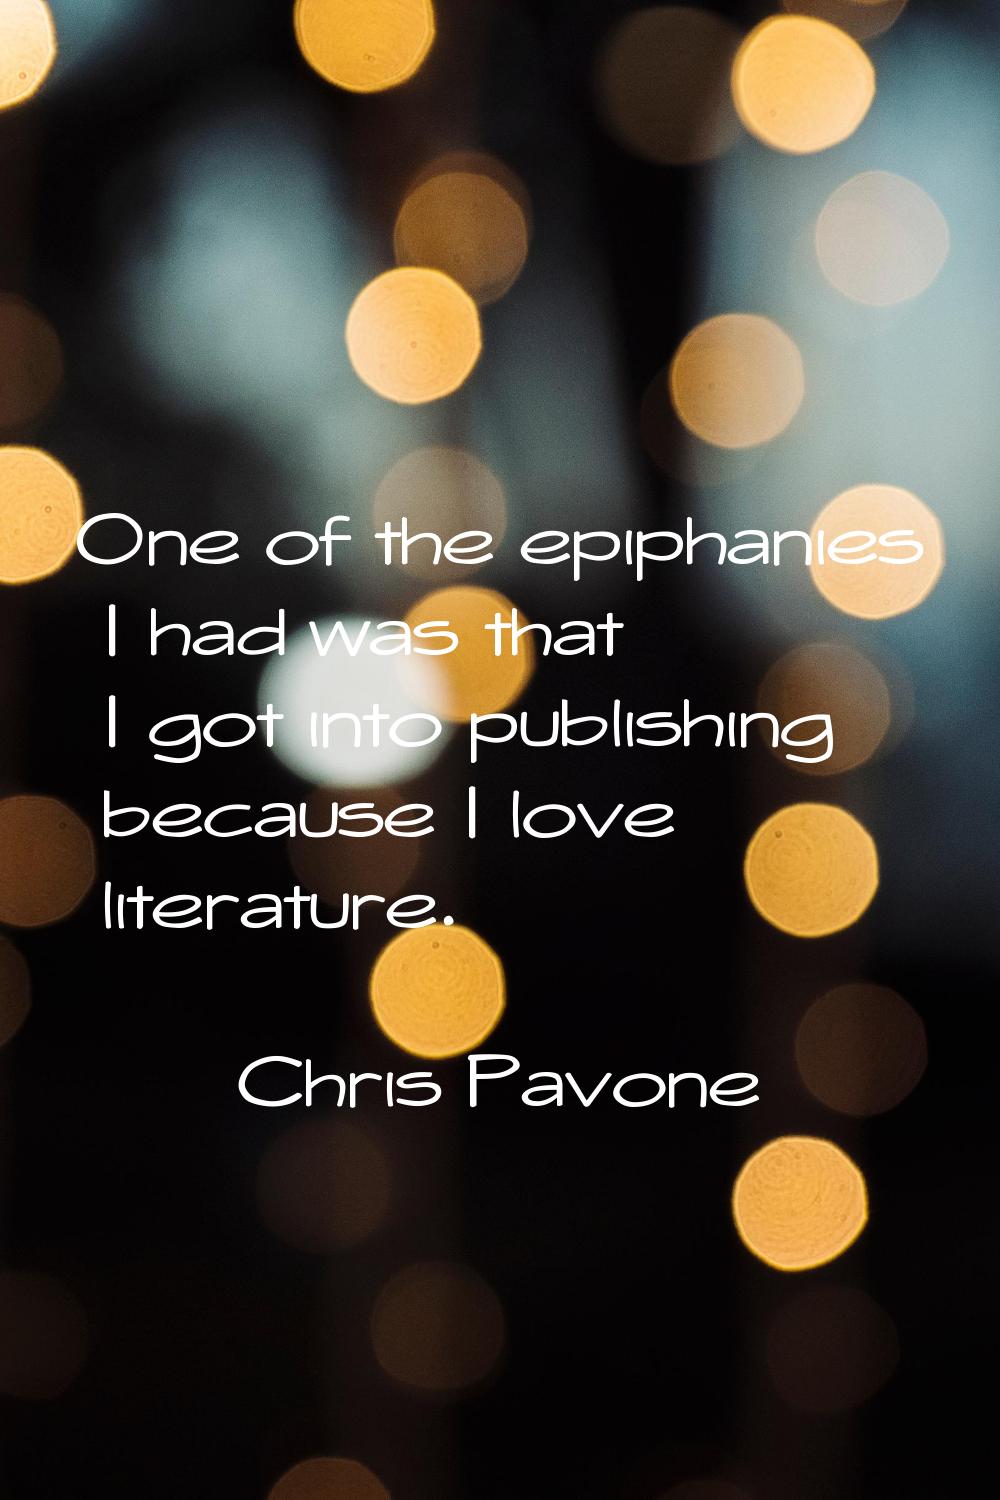 One of the epiphanies I had was that I got into publishing because I love literature.